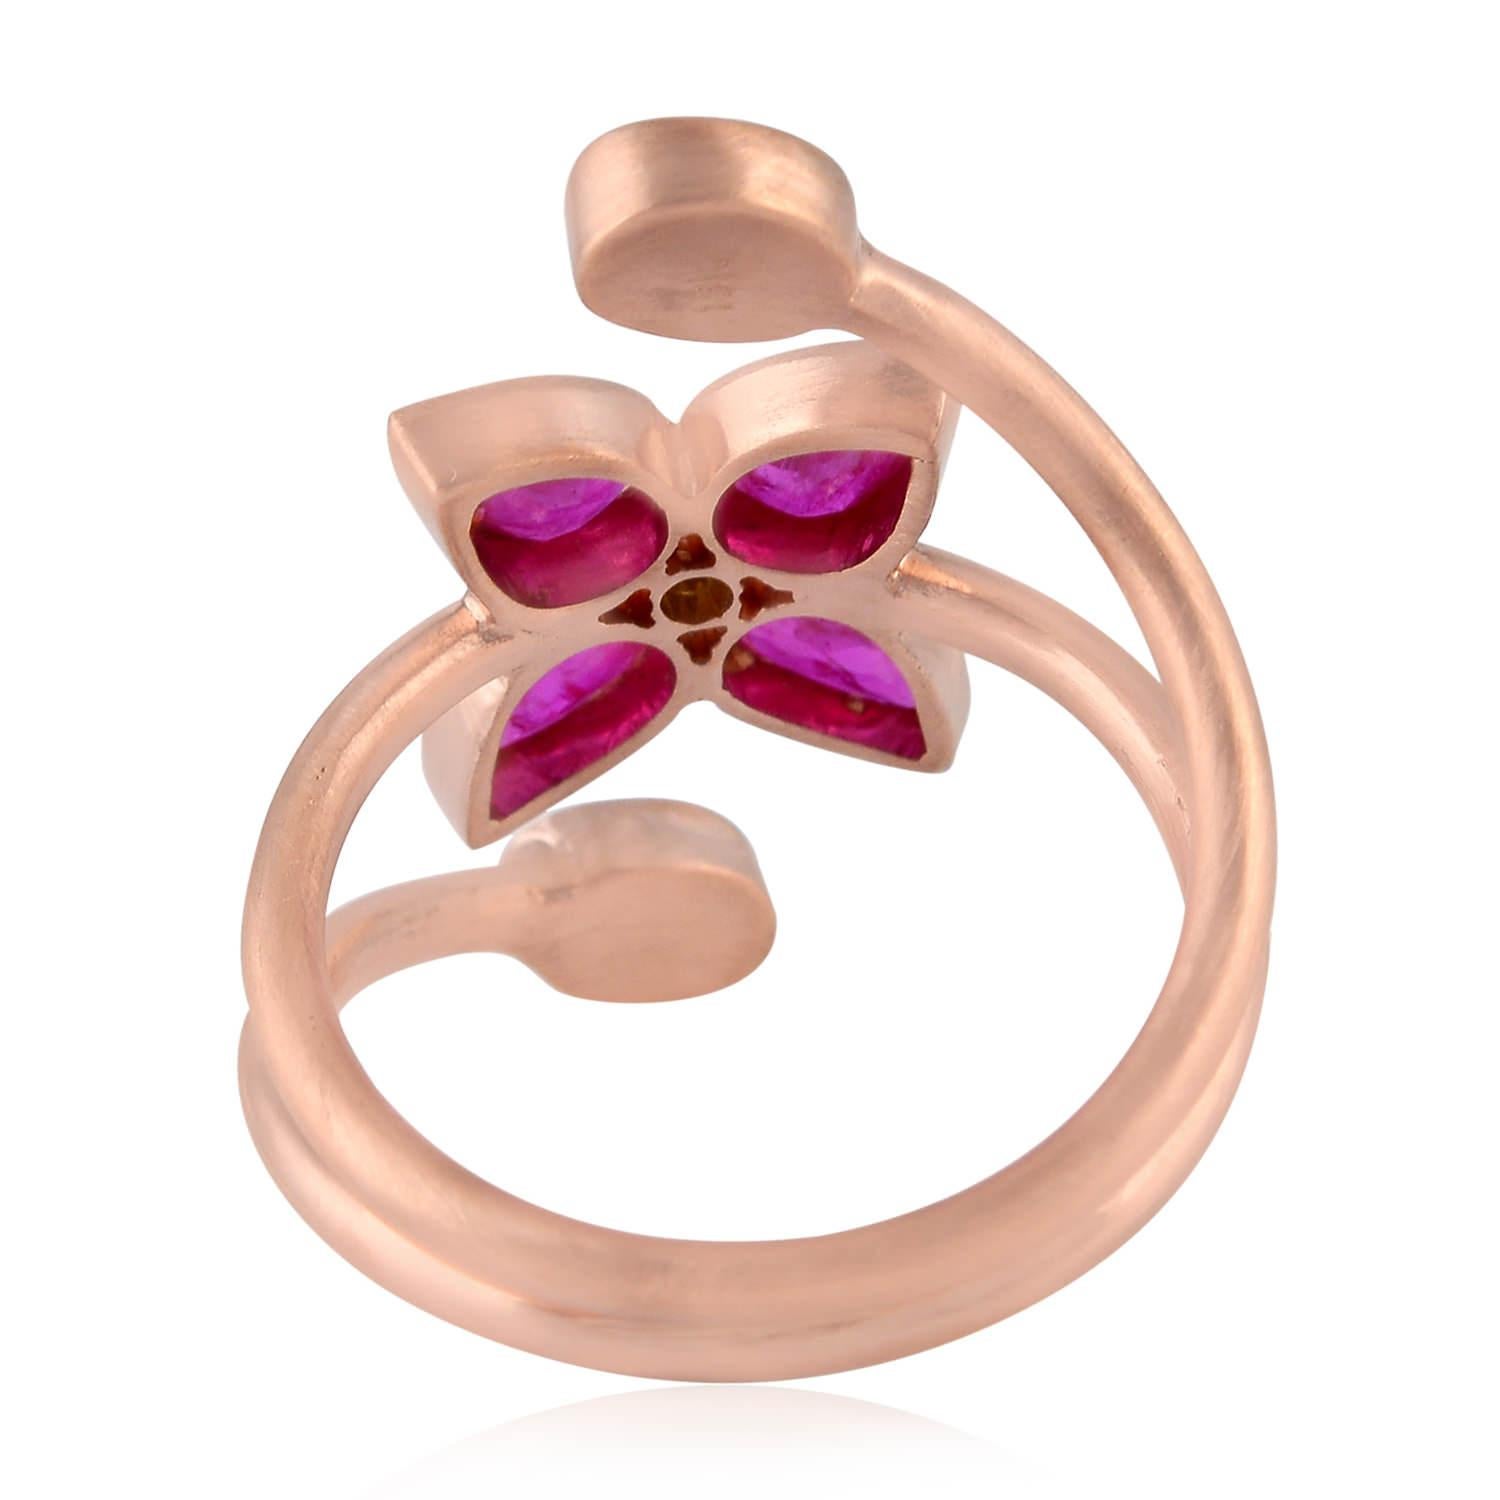 Rose Cut Floral Design Ruby and Diamond Ring Set in 18k Gold